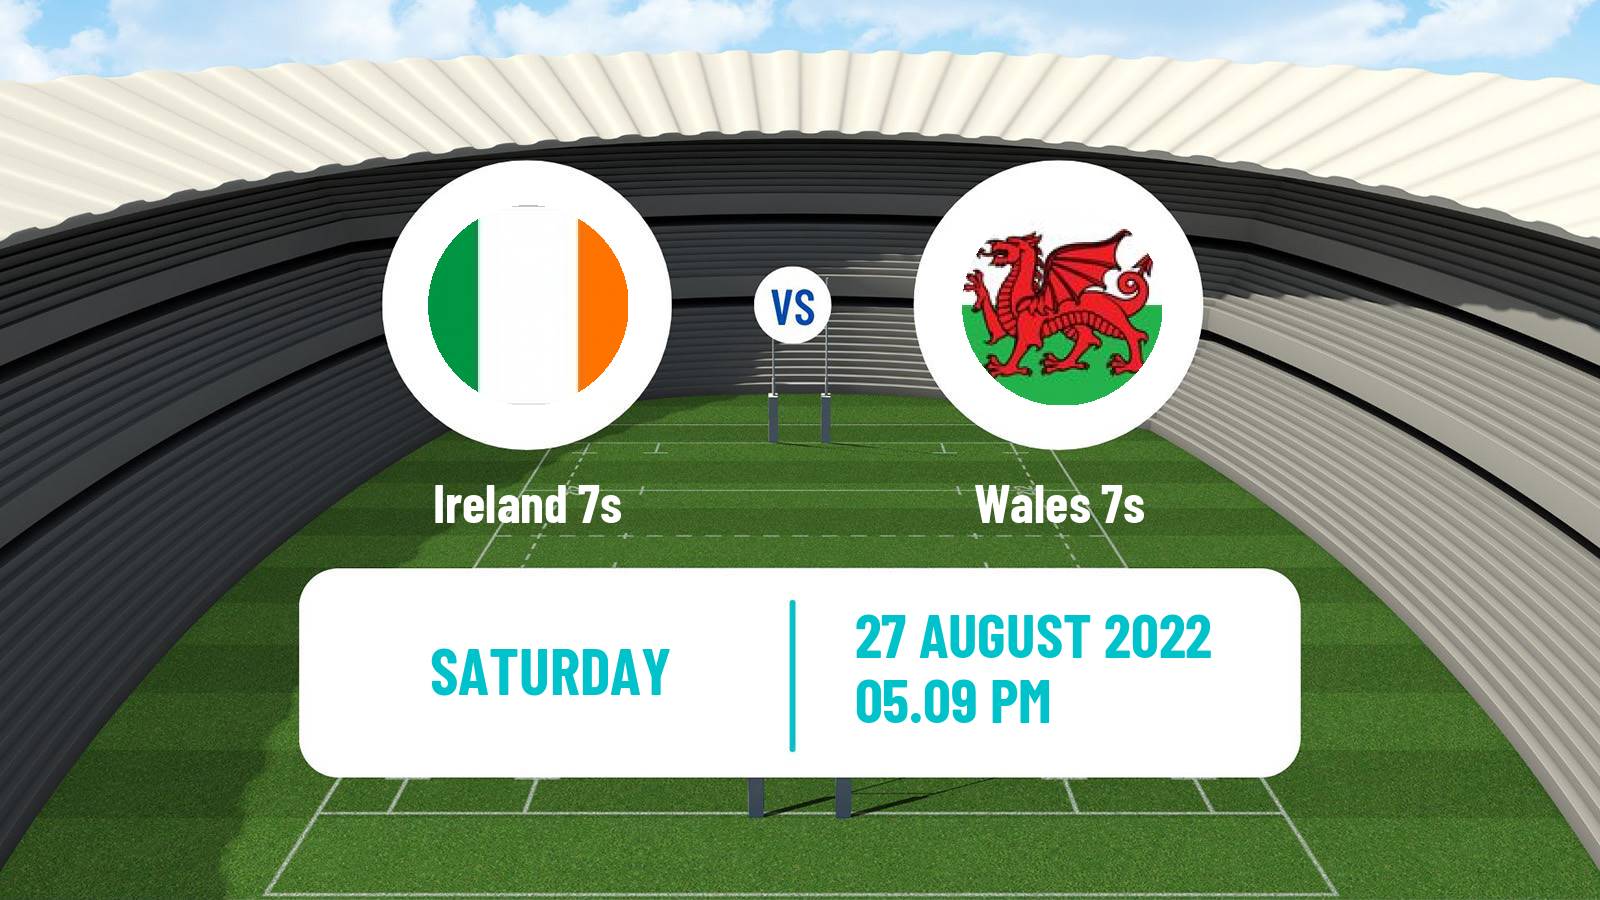 Rugby union Sevens World Series - USA Ireland 7s - Wales 7s